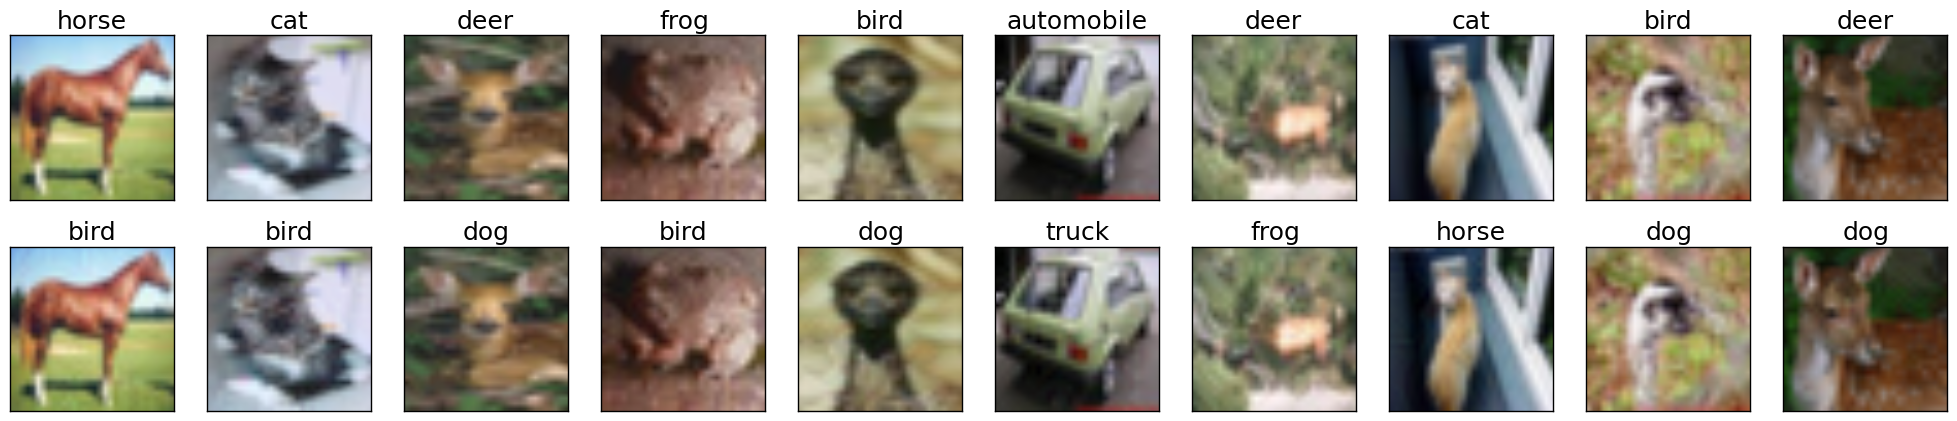 Sample visualization of untargeted adversarial examples for the CIFAR-10 dataset.